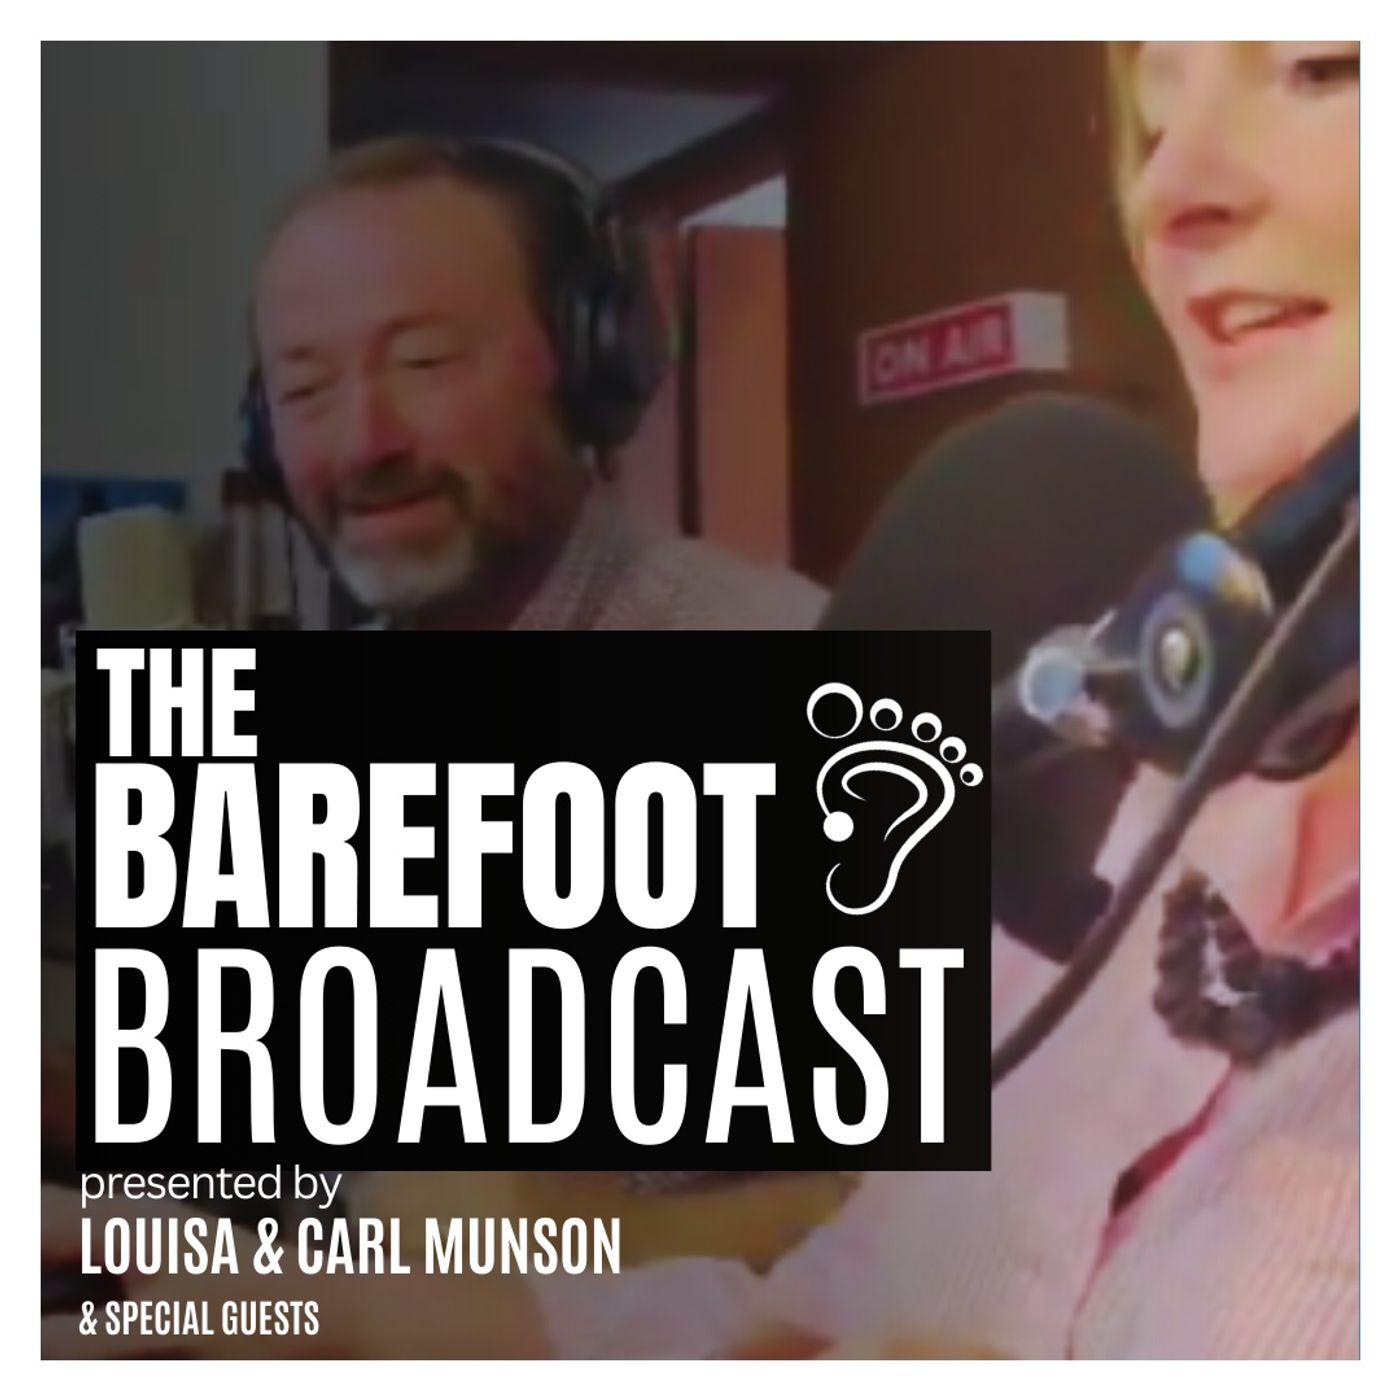 The Barefoot Broadcast